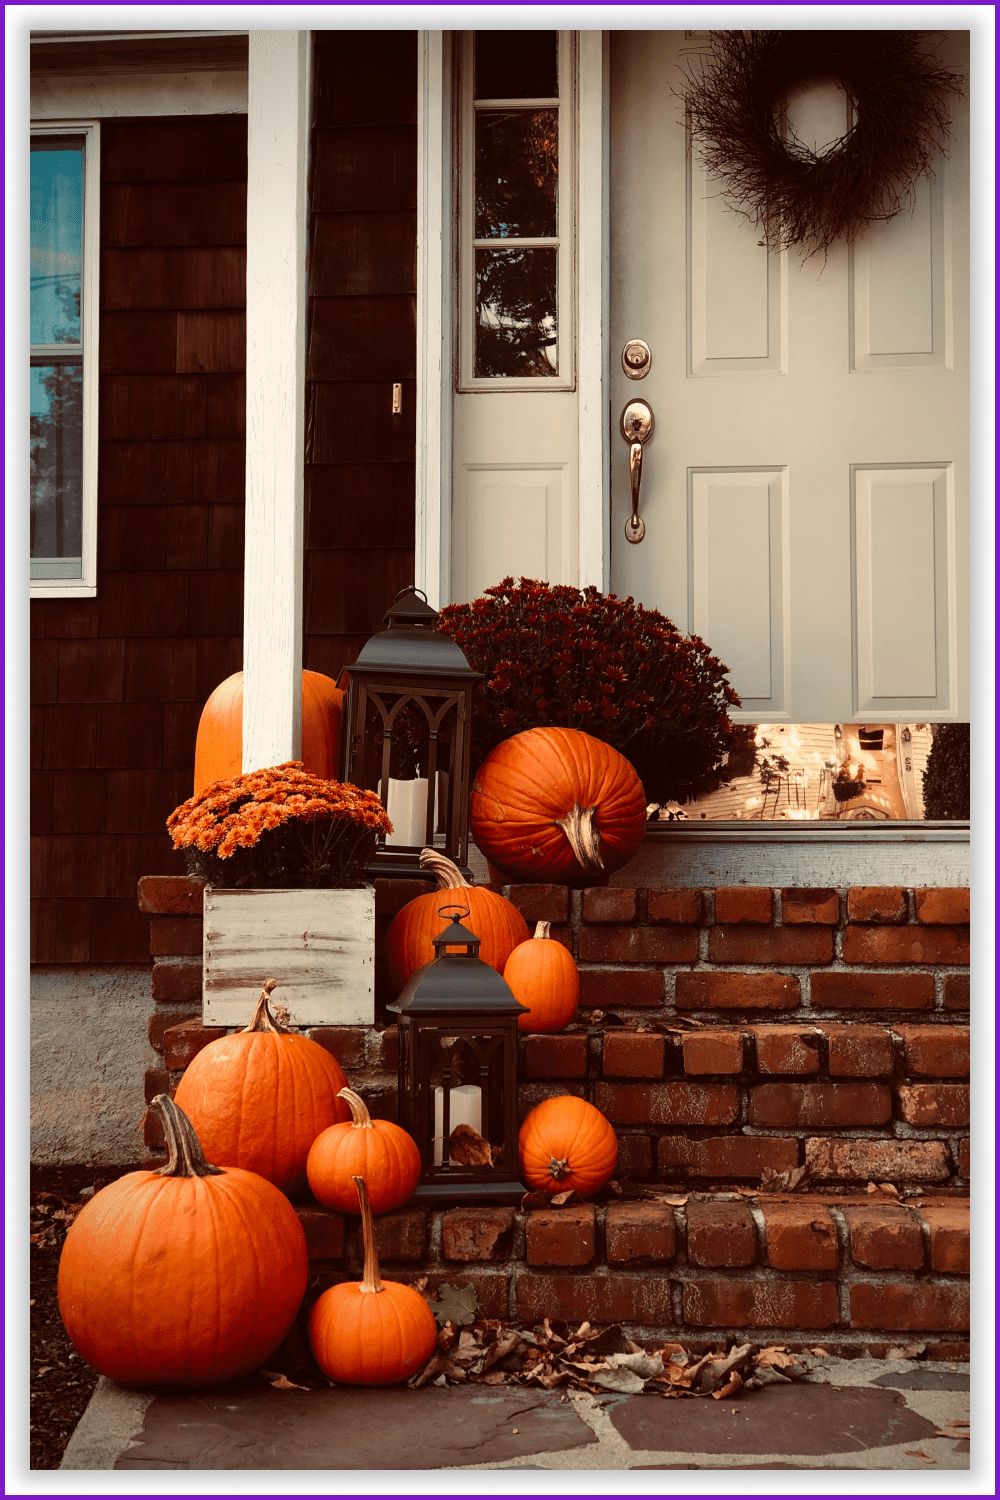 Photo of a house porch with orange pumpkins and big lanterns on it.